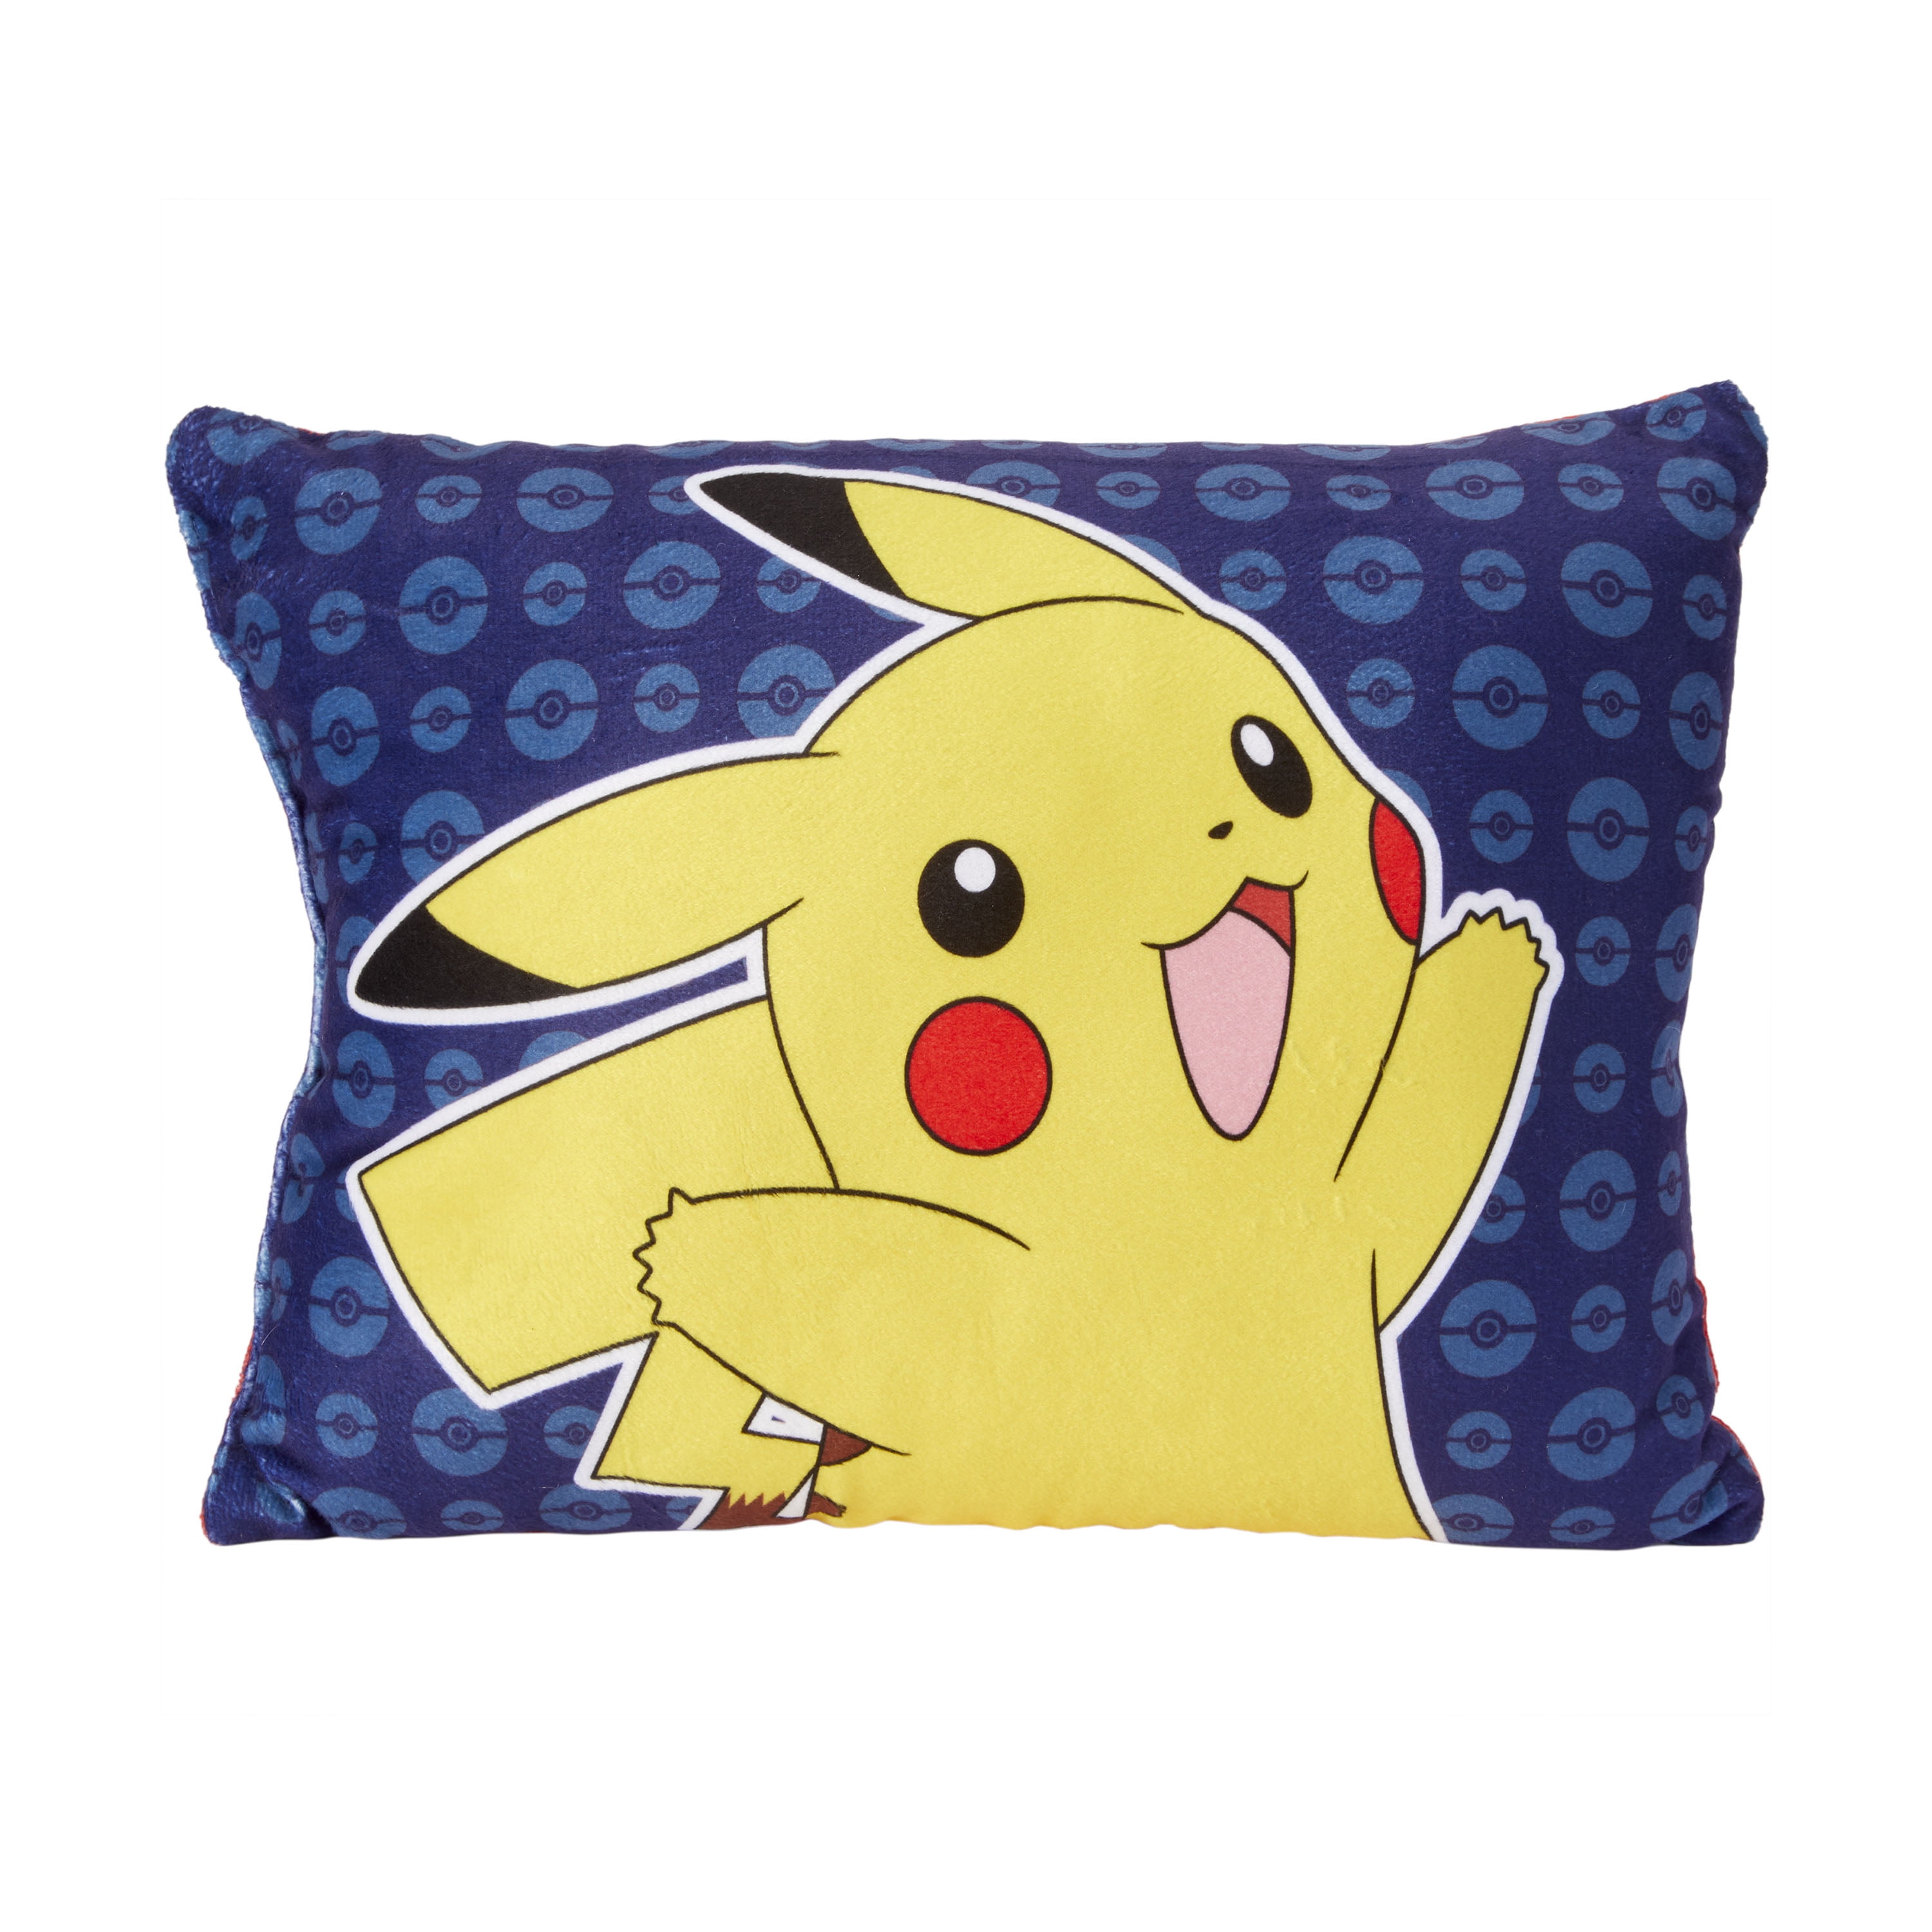 WYMDDYM Soft Pikachu Plush Fold Pillow Small Blanket Pillow Rest Pillow for Boys and Girls